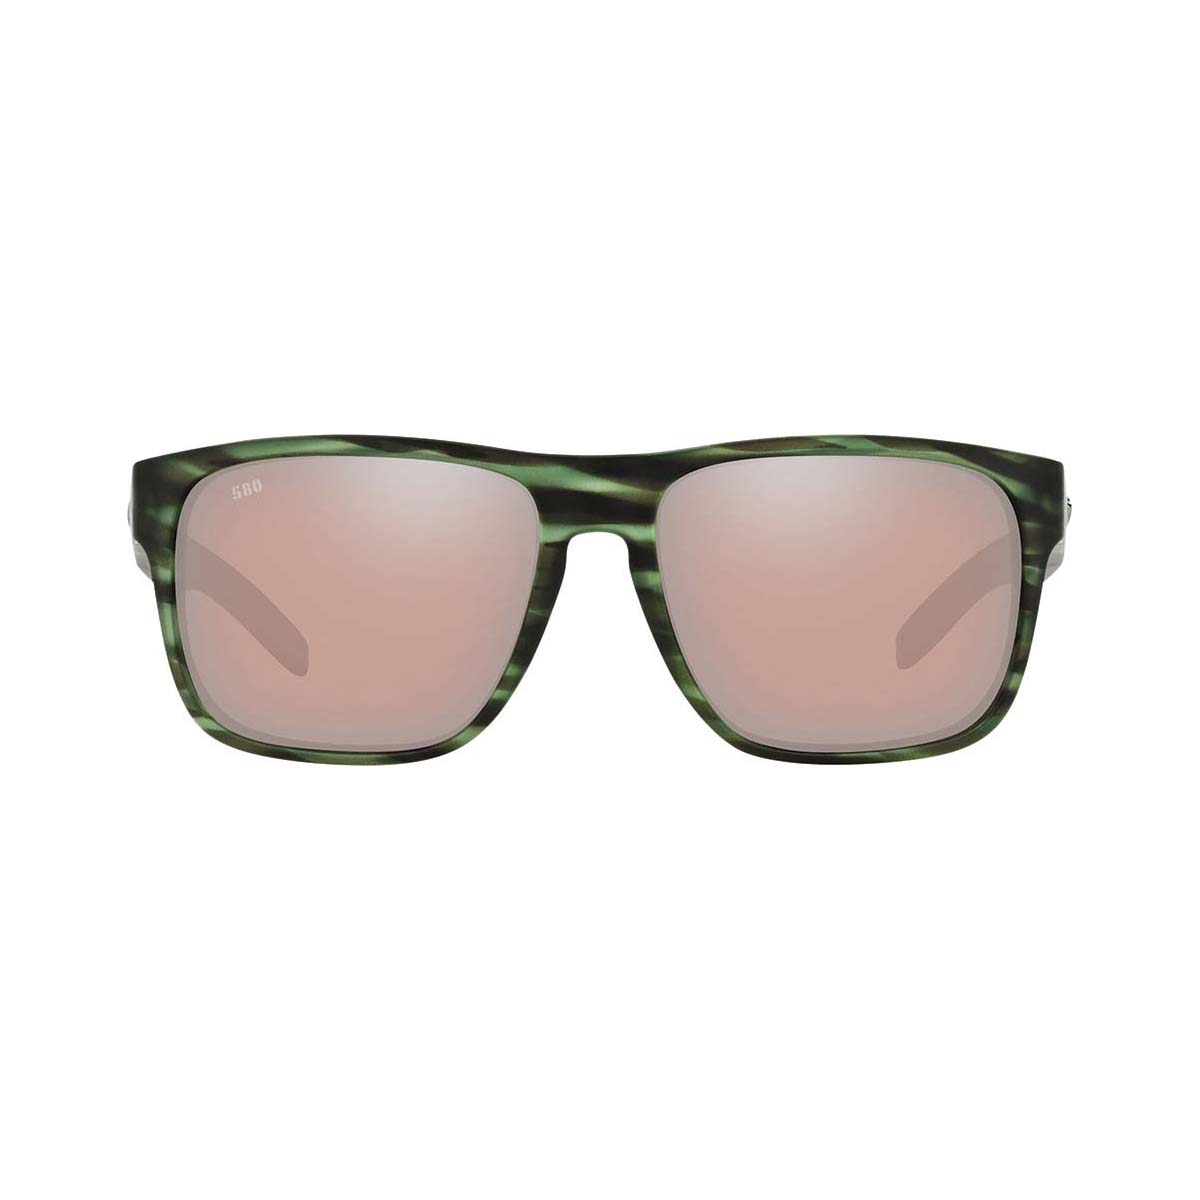 Costa Spearo XL Men's Sunglasses Green with Grey Lens